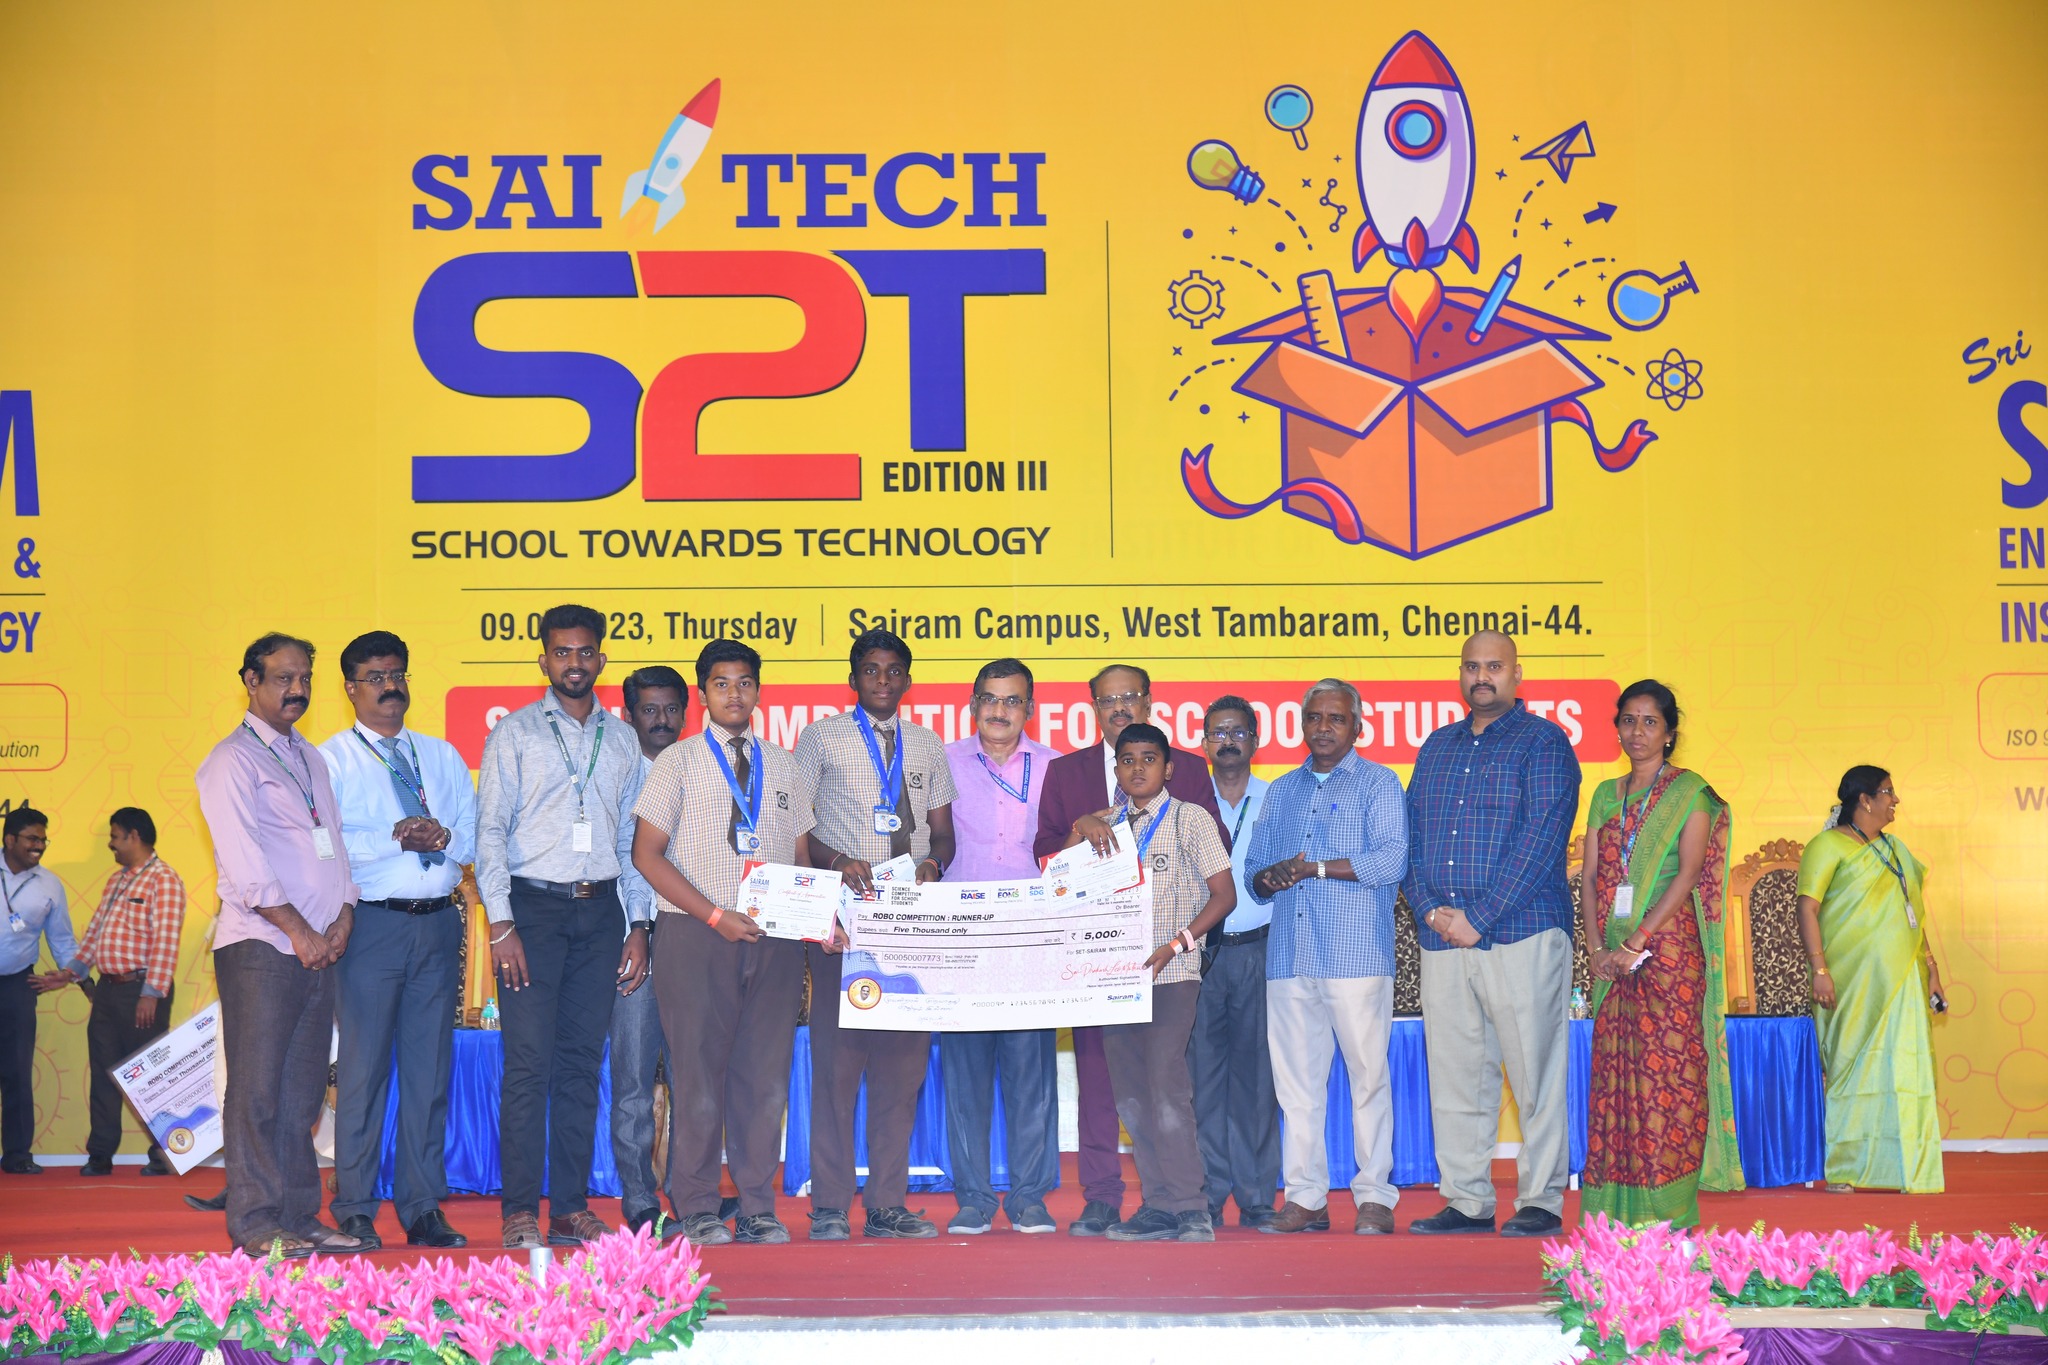 SaiRam MHSS TVR has won 2nd place and received ₹5000 cash award for SaiTechS2T Science Competition.